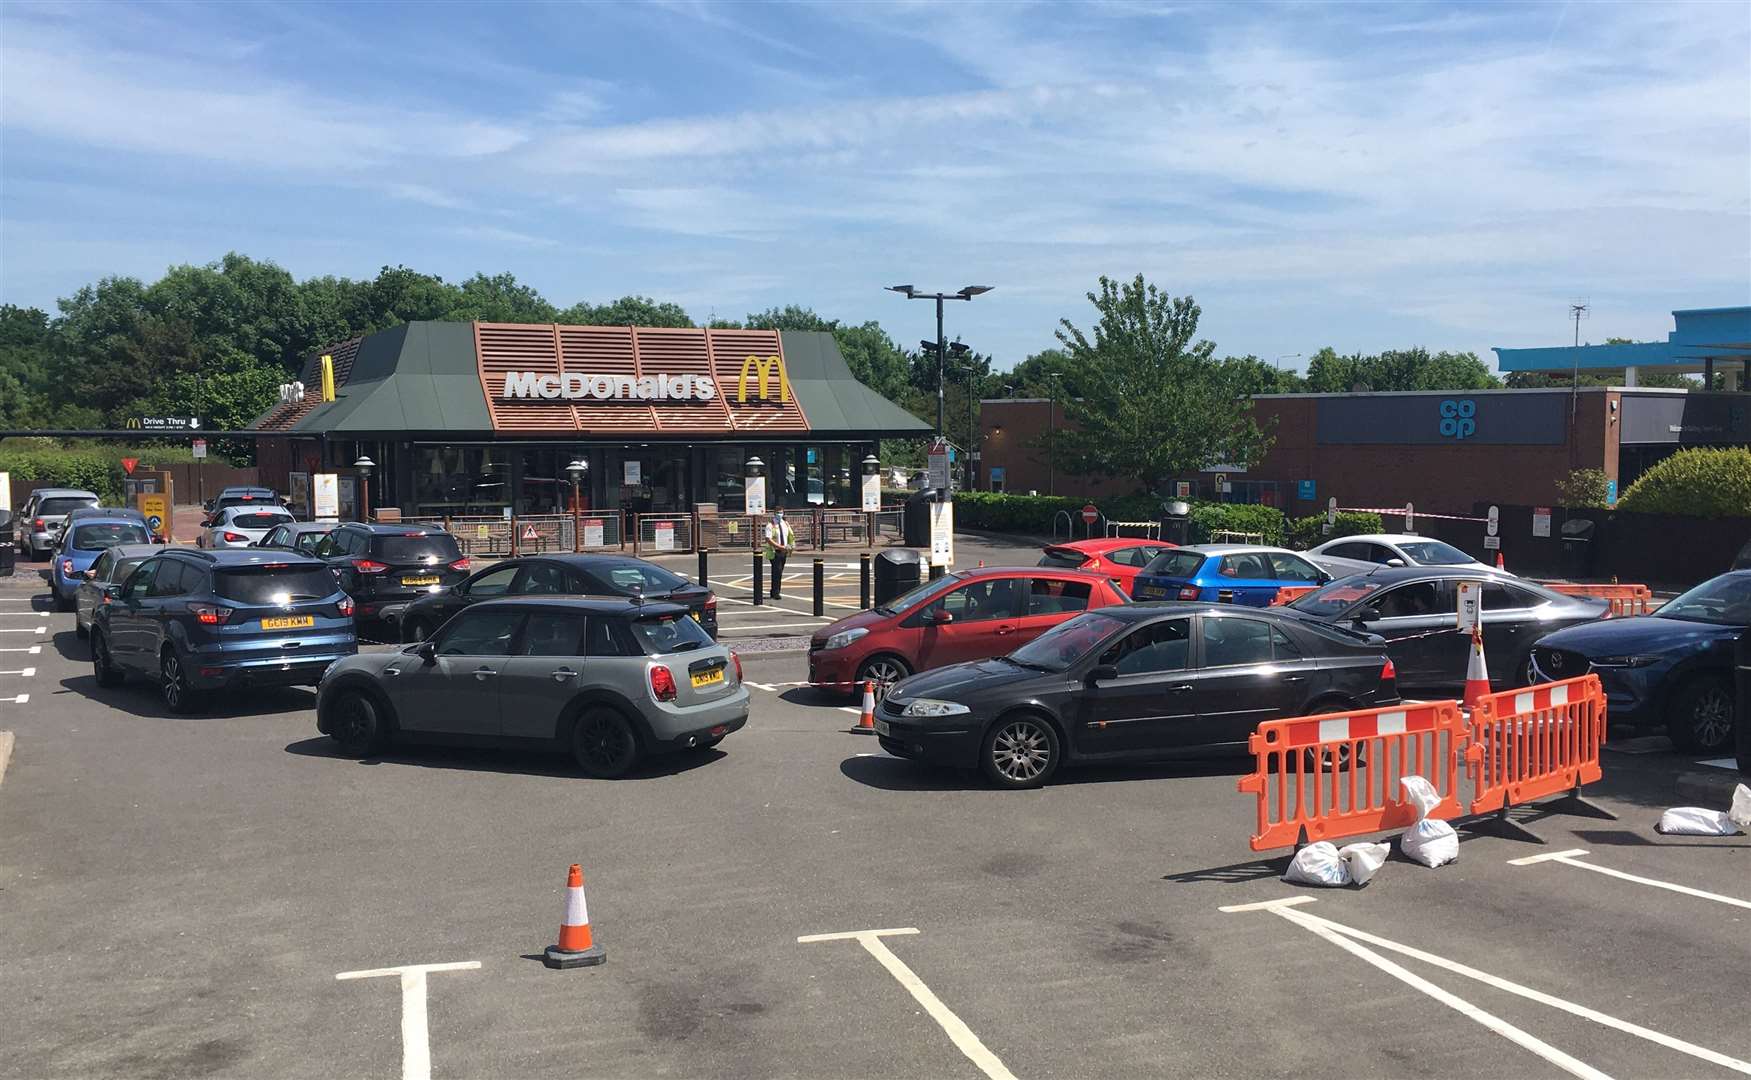 As McDonalds opened it's restaurants for drive-thrus the numbers of cars went up dramatically. This was the scene in Bobbing on May 26.